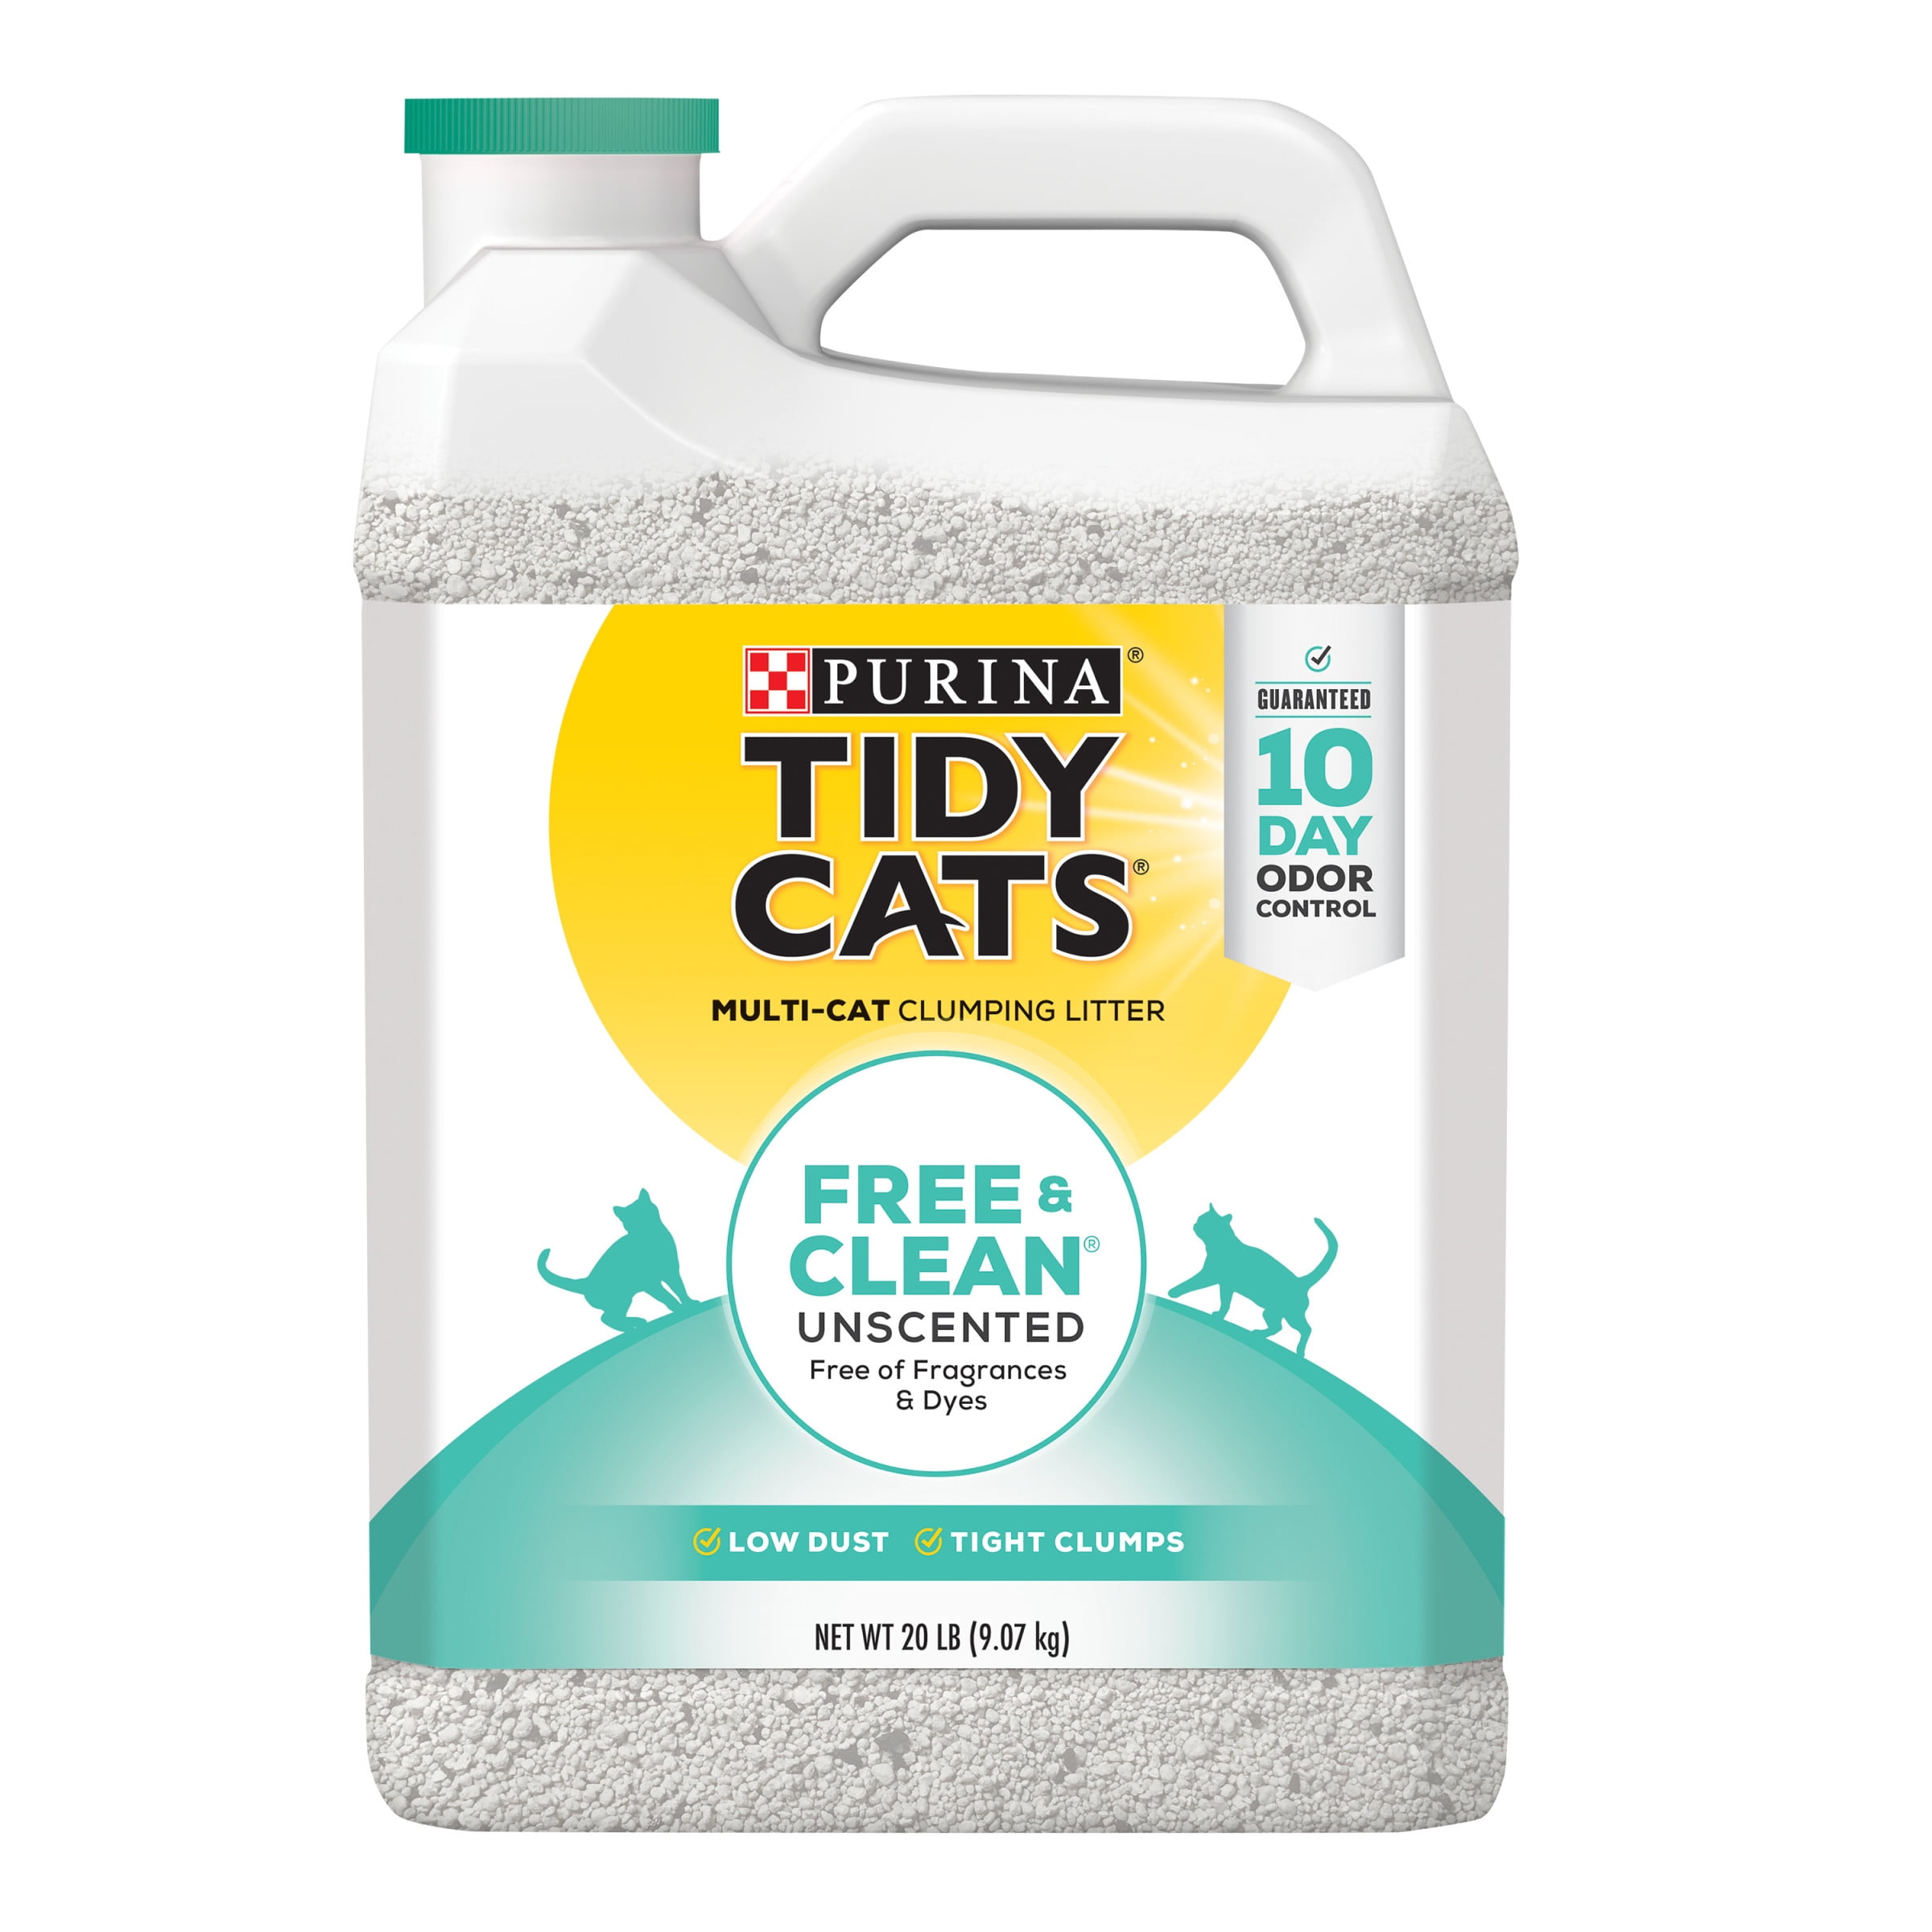 Purina Tidy Cats Clumping Cat Litter, Free & Clean Unscented Multi Cat Litter, 20 lb. Jug